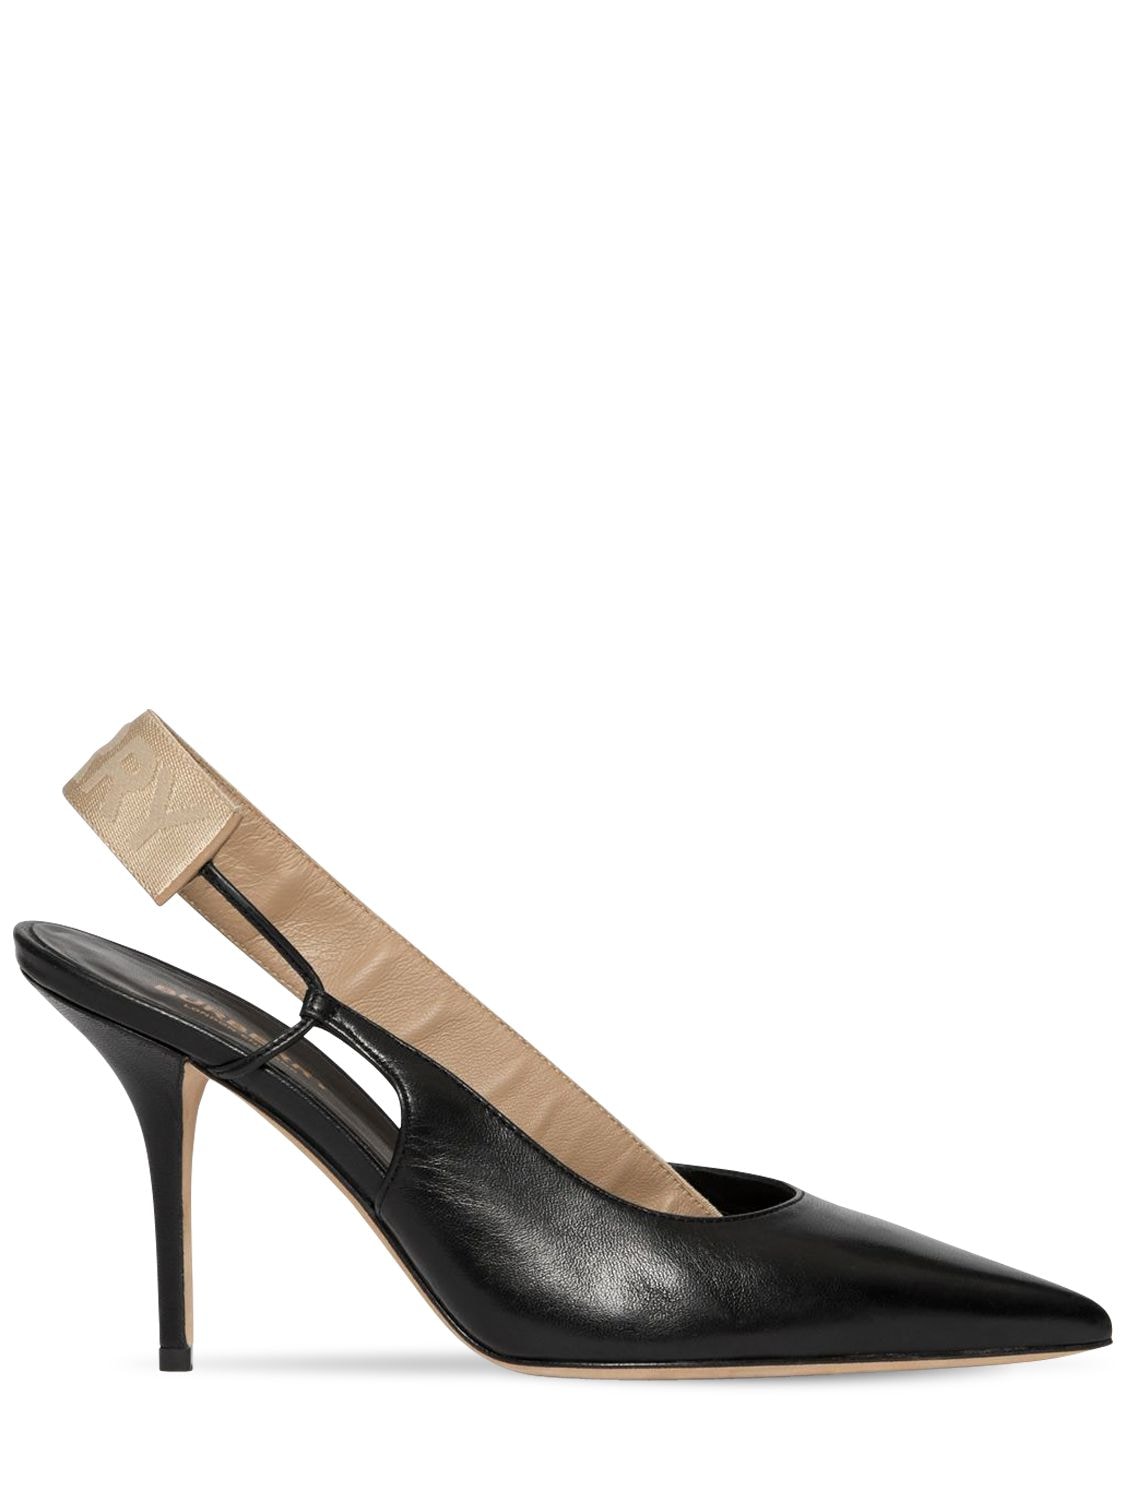 BURBERRY 90MM MARIA LEATHER SLING BACK PUMPS,70IG4S010-QTEXODK1